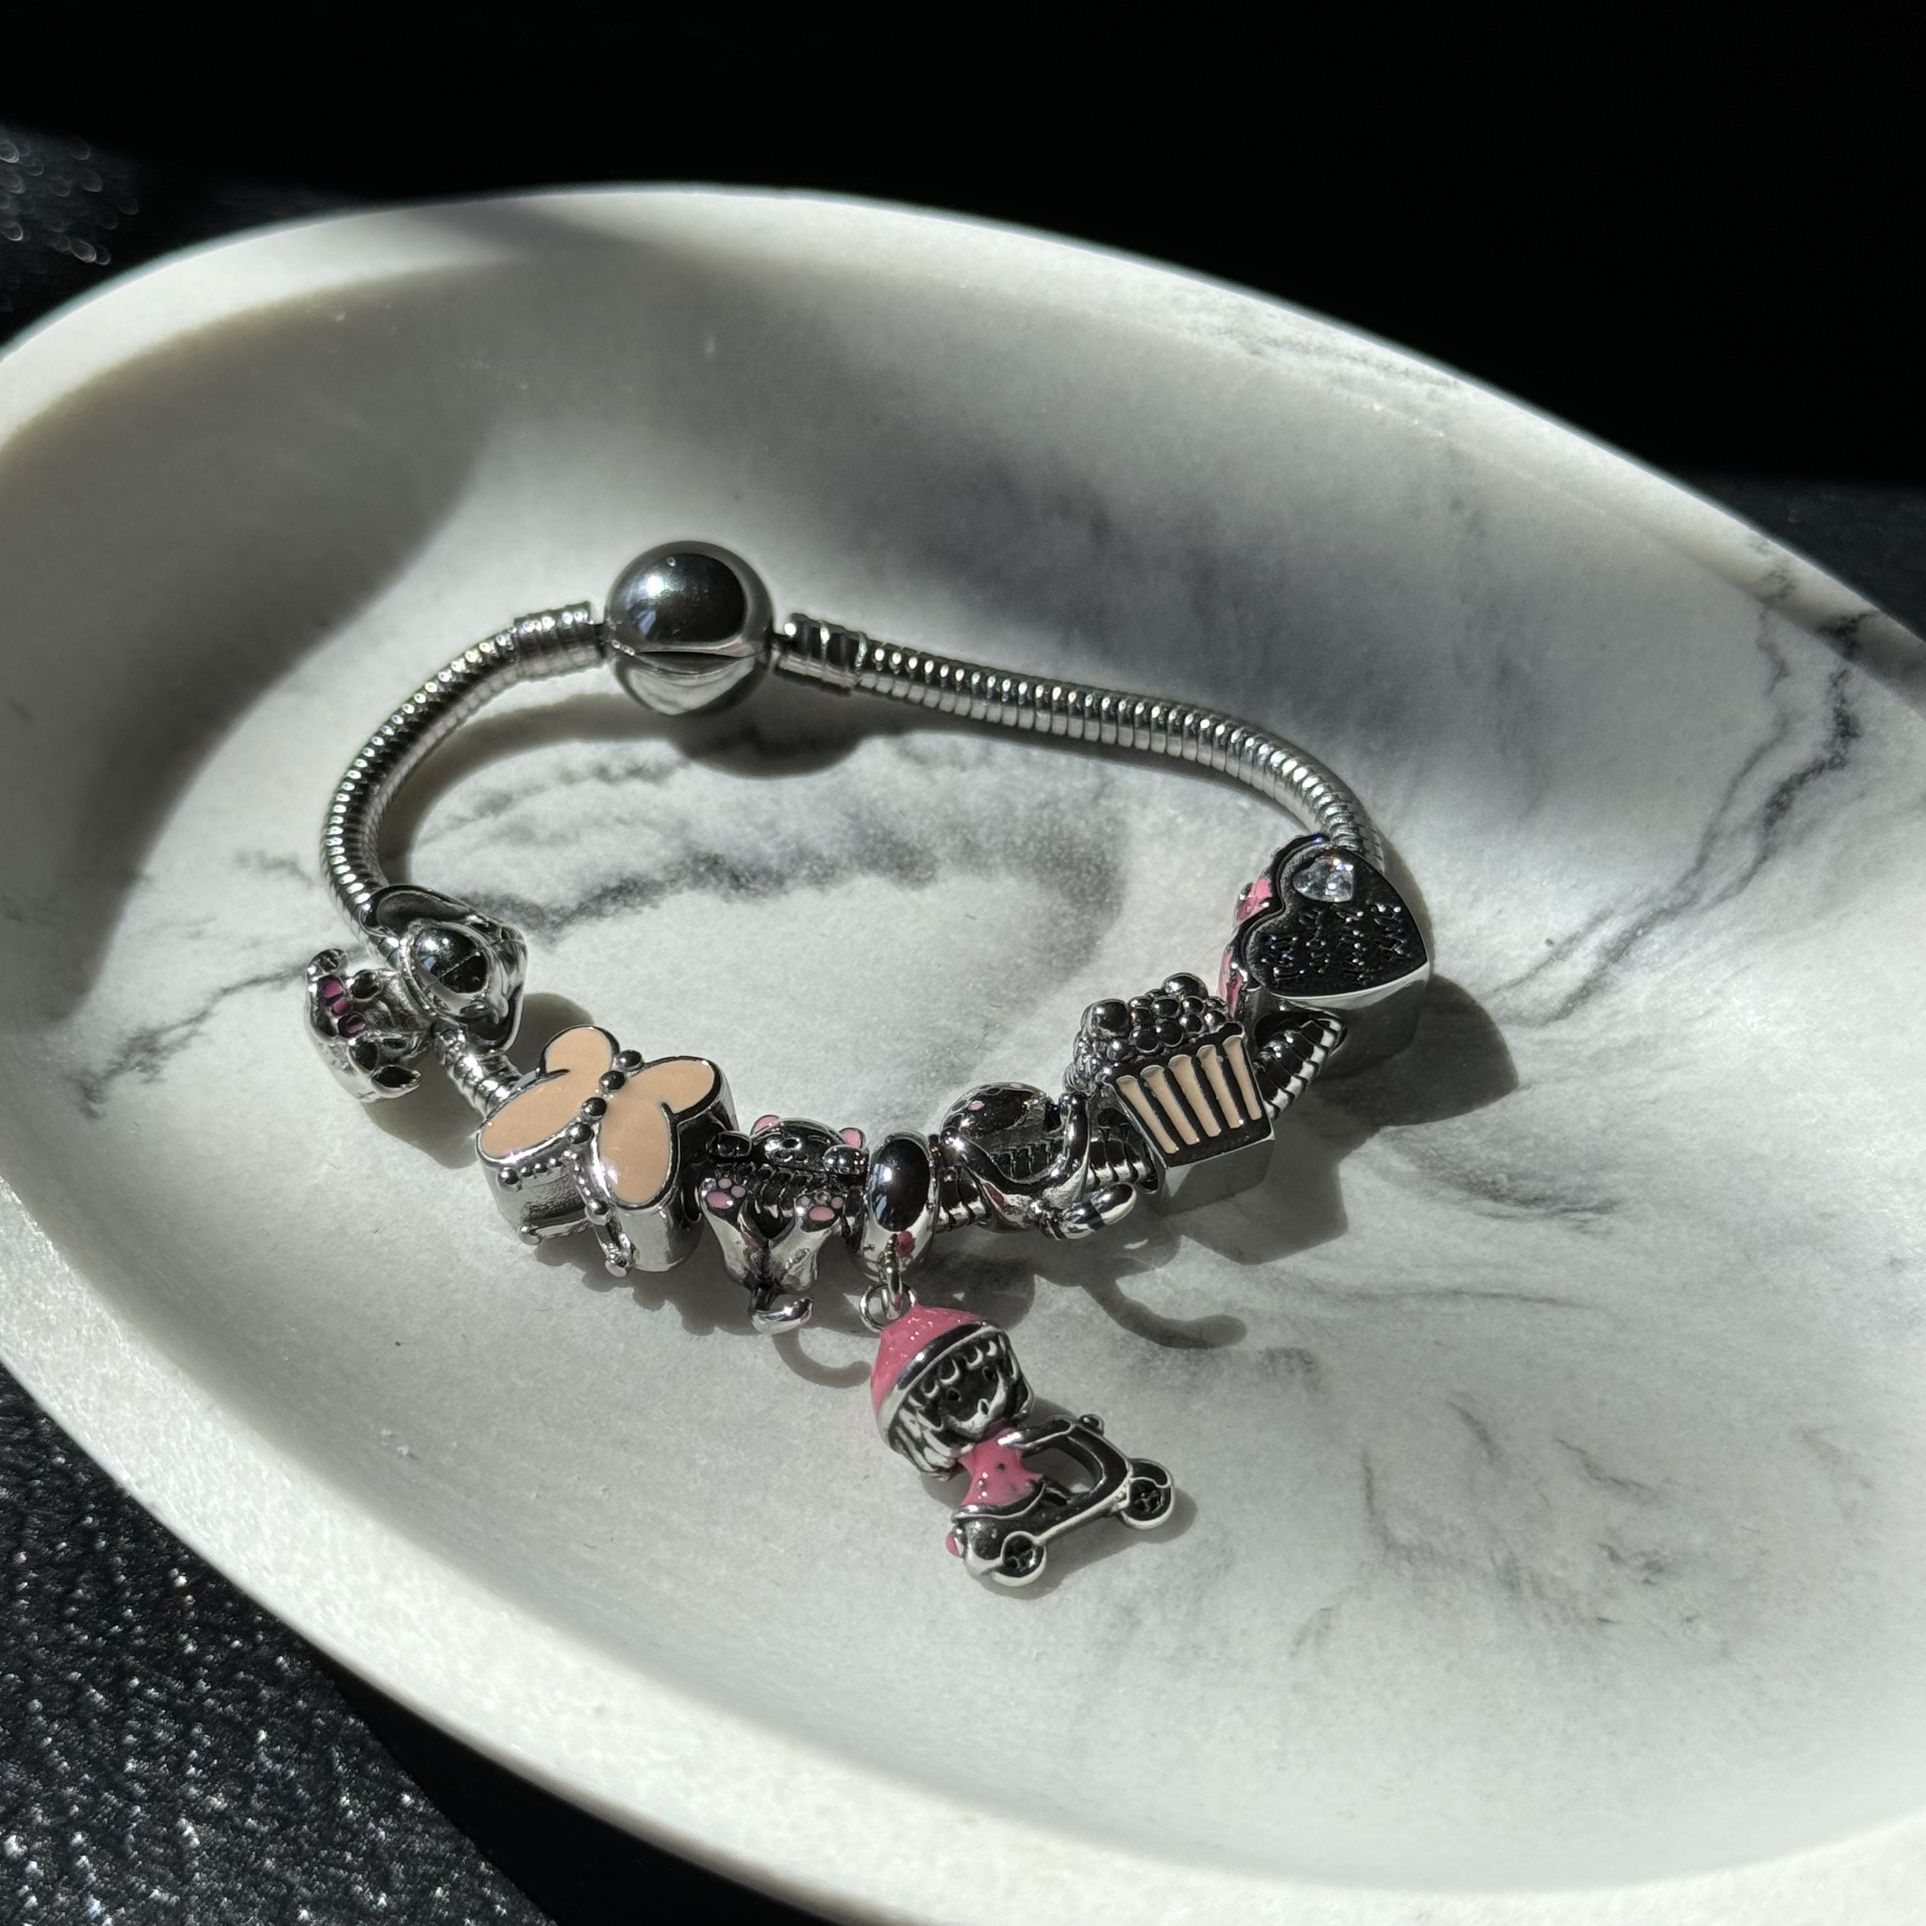 pink charm bracelet with charm all of stainless steel 16 cm